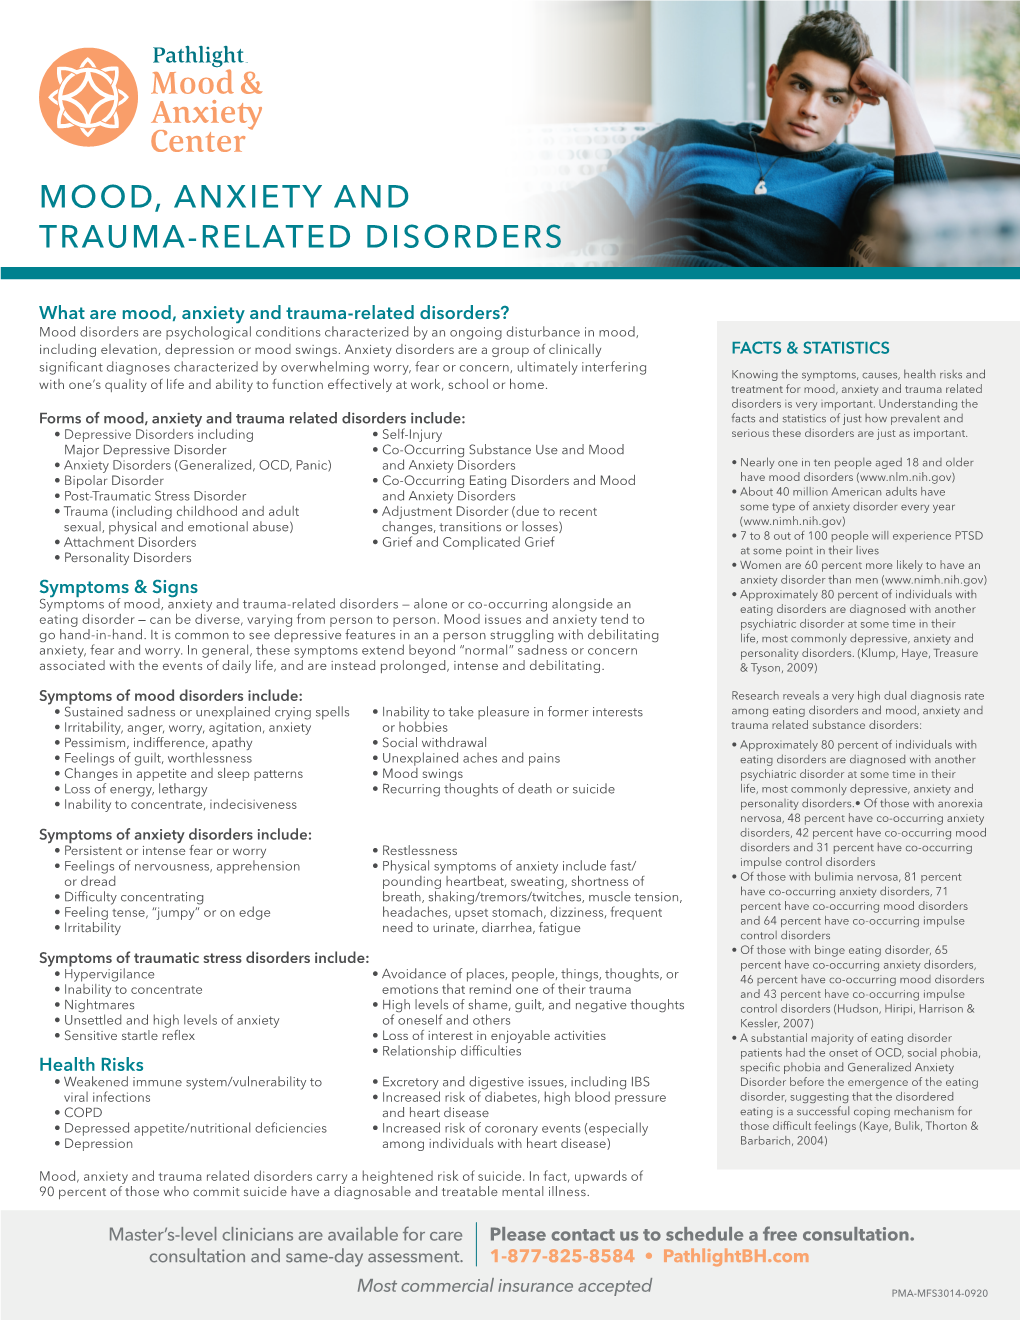 Mood, Anxiety and Trauma-Related Disorders